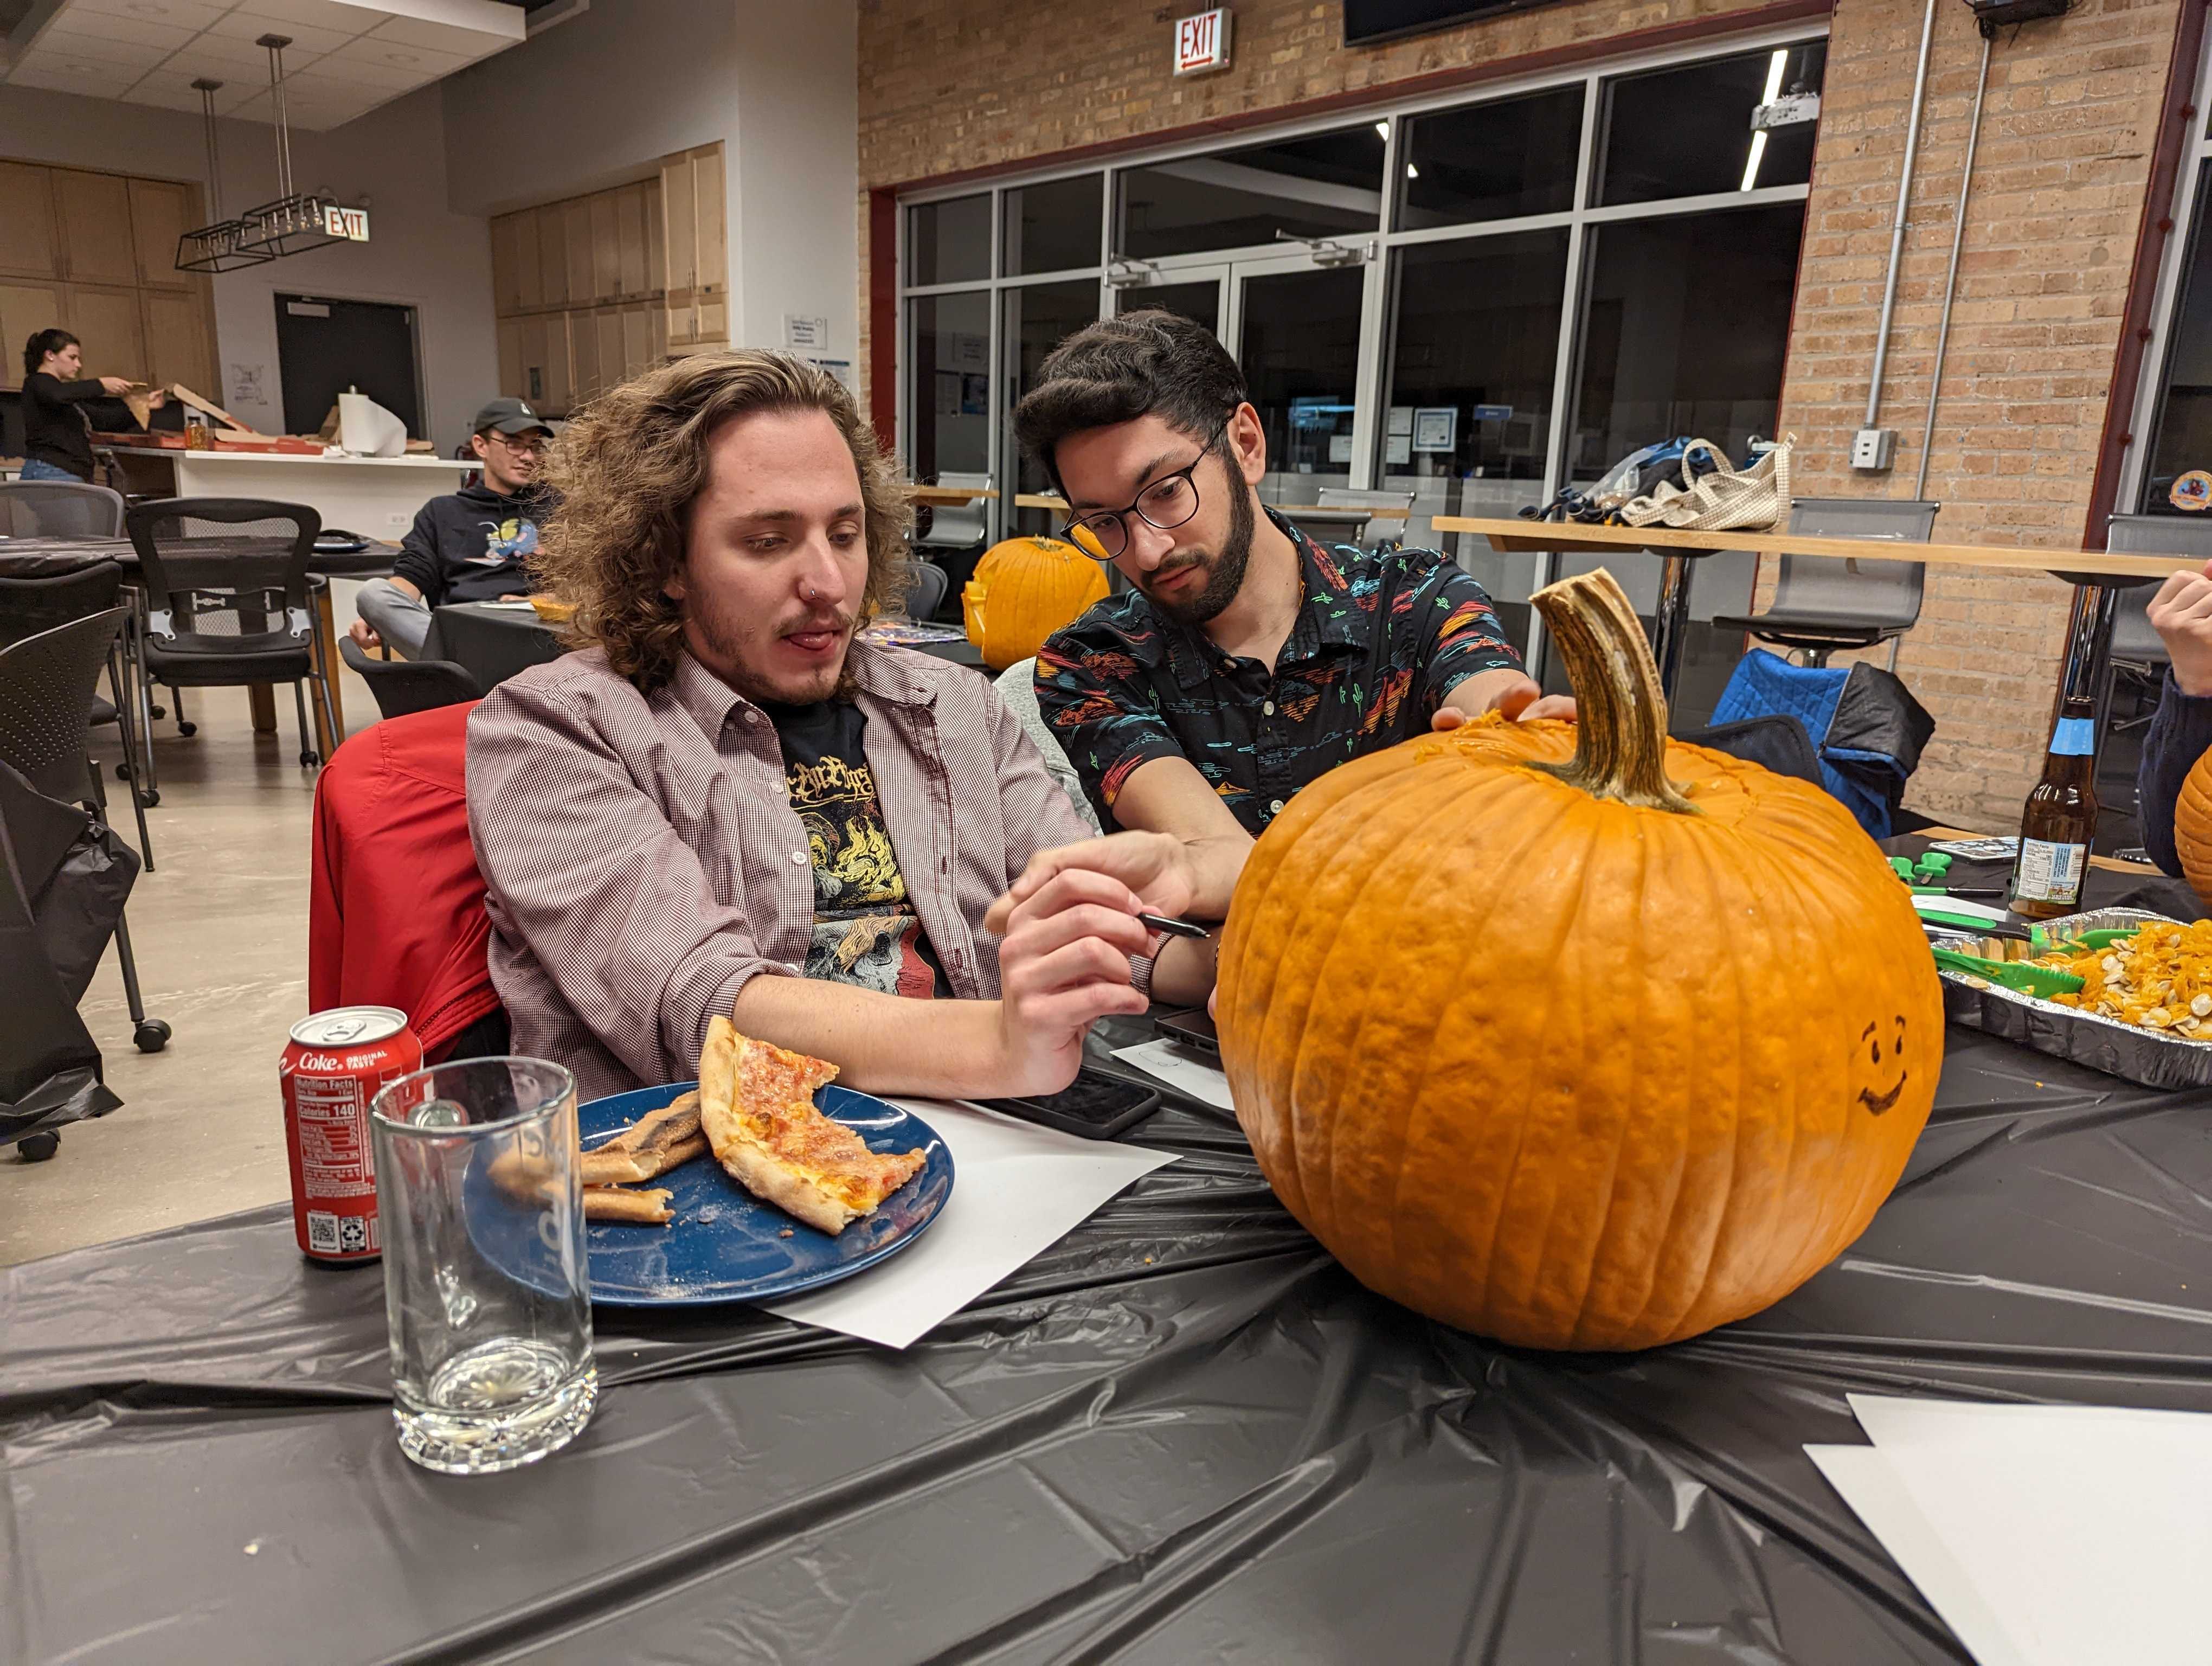 Two people carving a pumpkin.